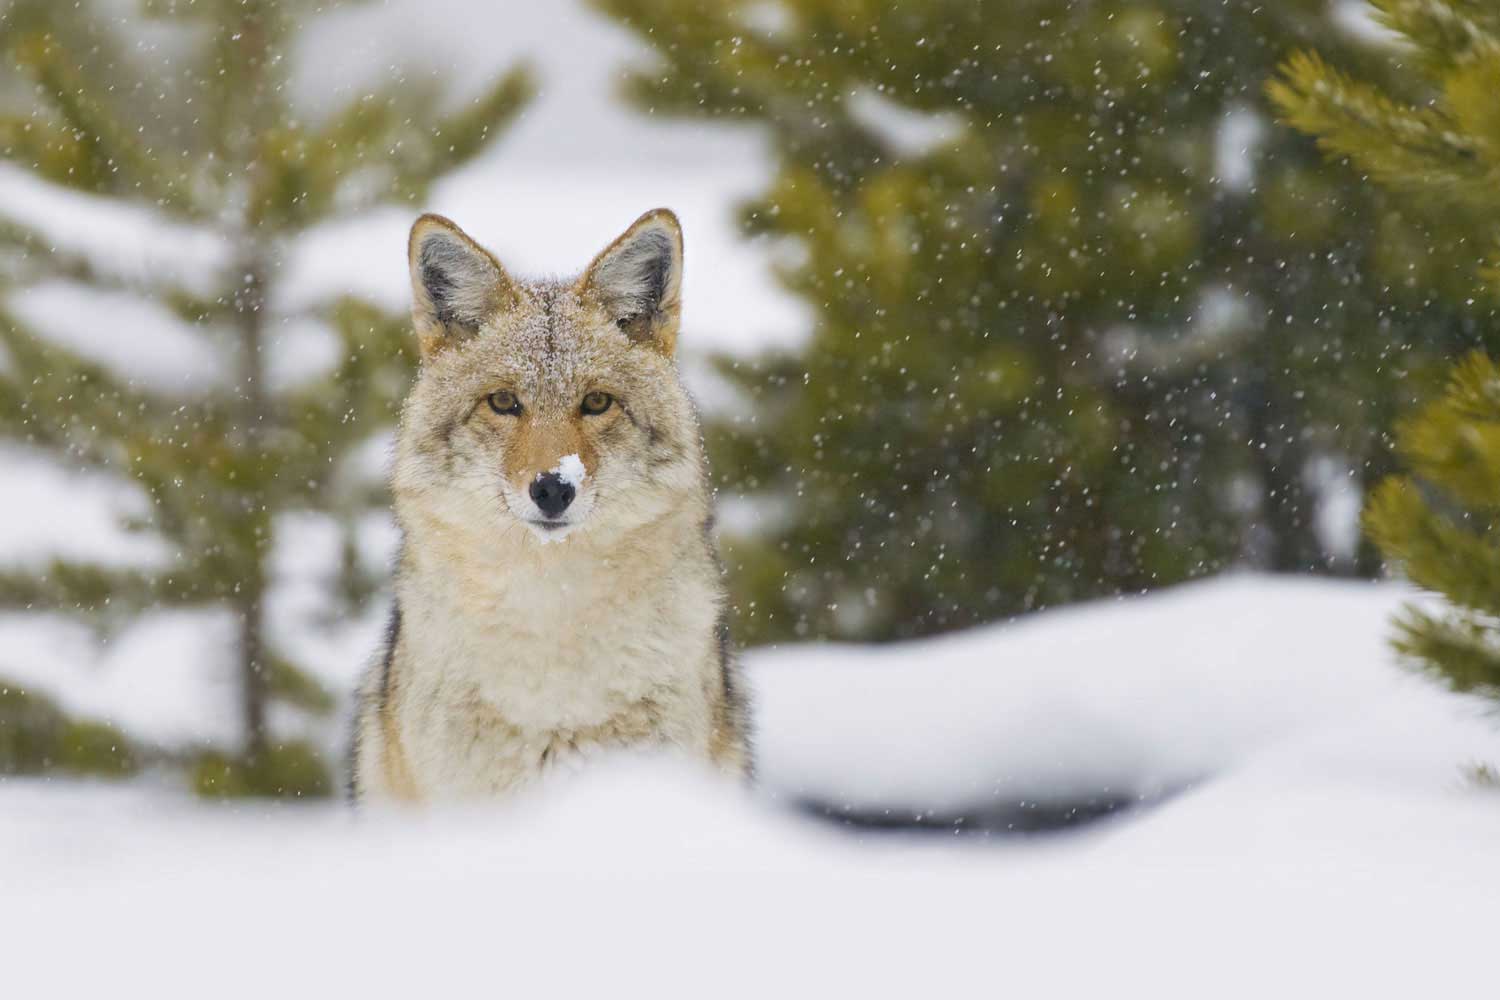 A coyote sitting in the snow.